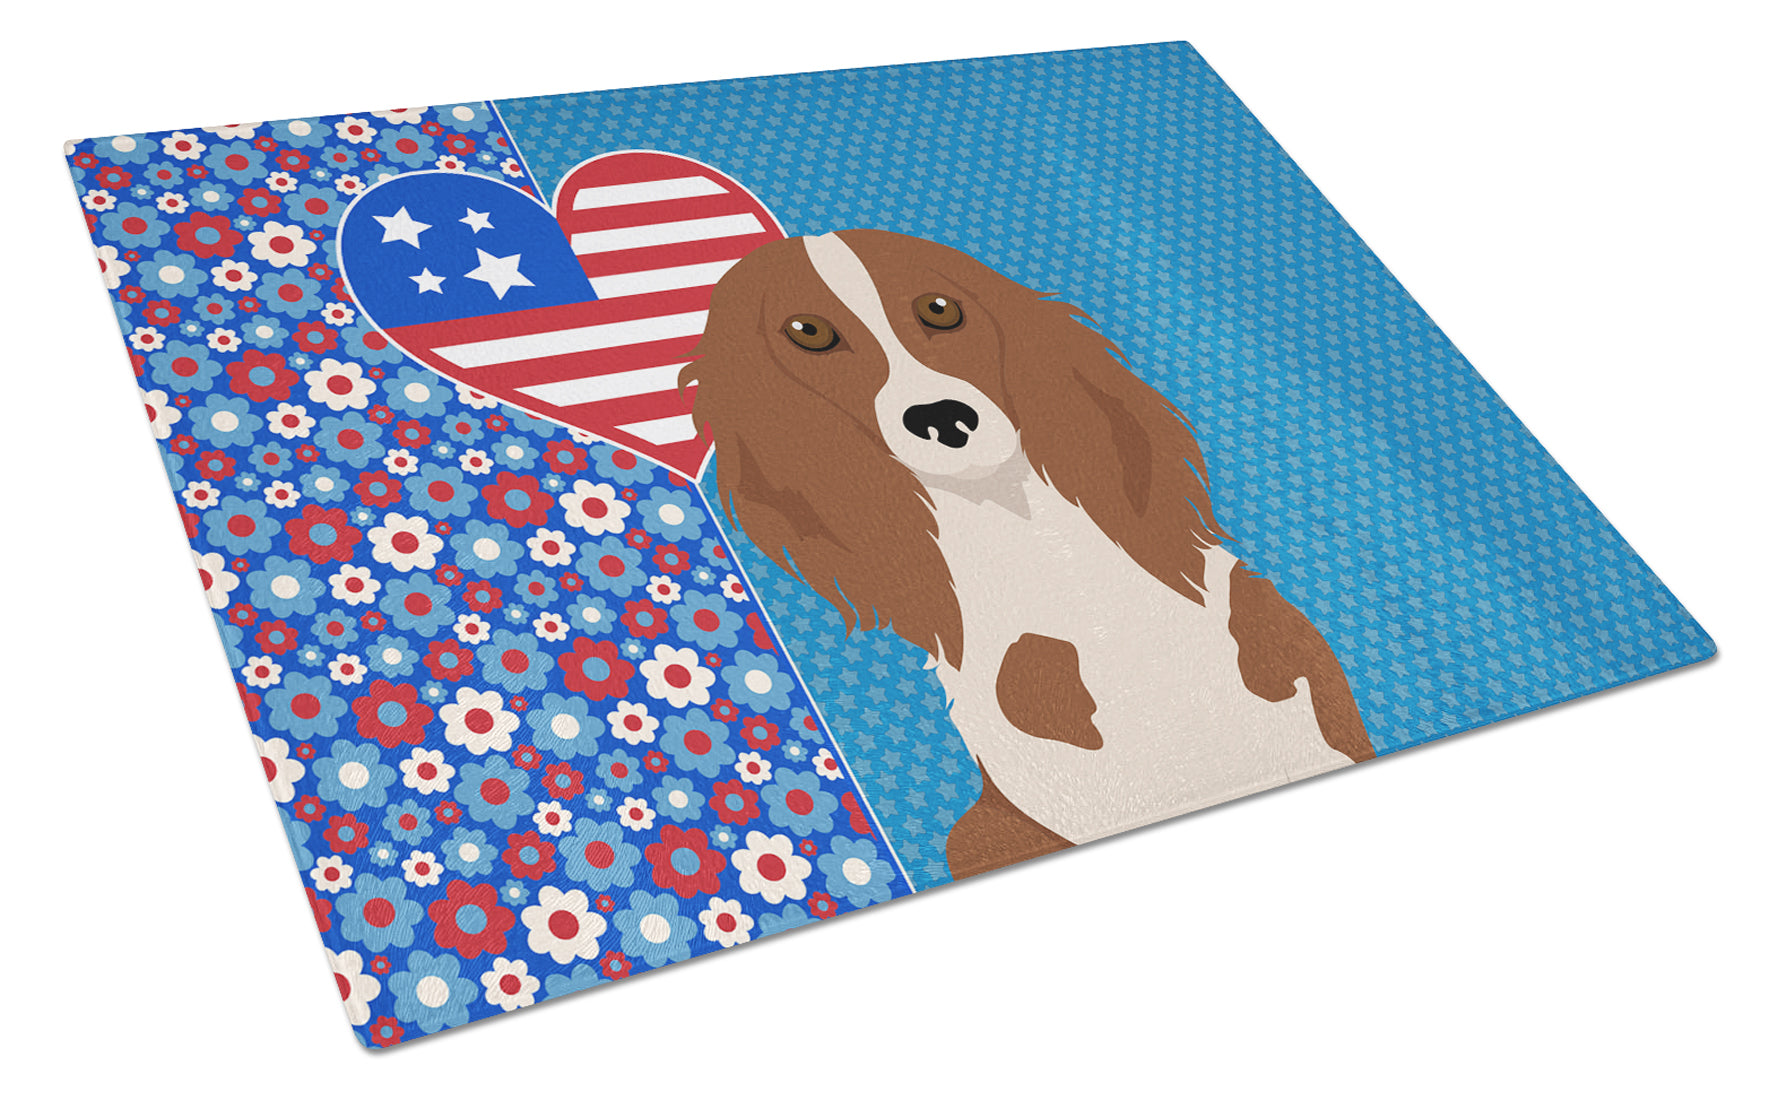 Buy this Longhair Red Pedbald Dachshund USA American Glass Cutting Board Large